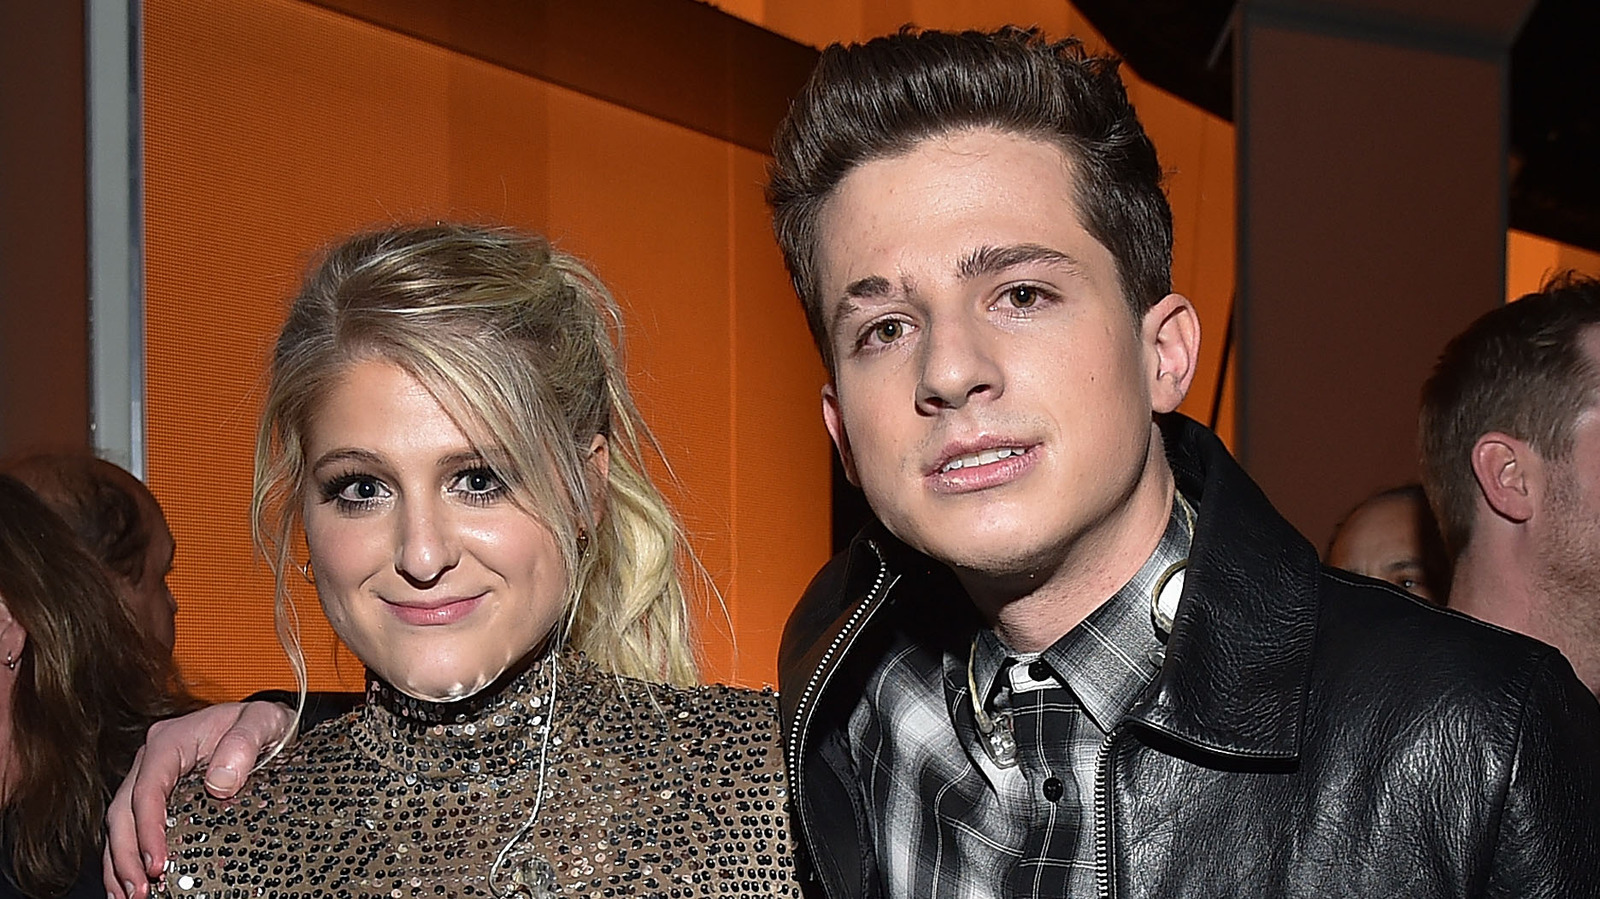 Meghan Trainor And Charlie Puth’s Viral AMAs Kiss Wasn’t Their First – The List